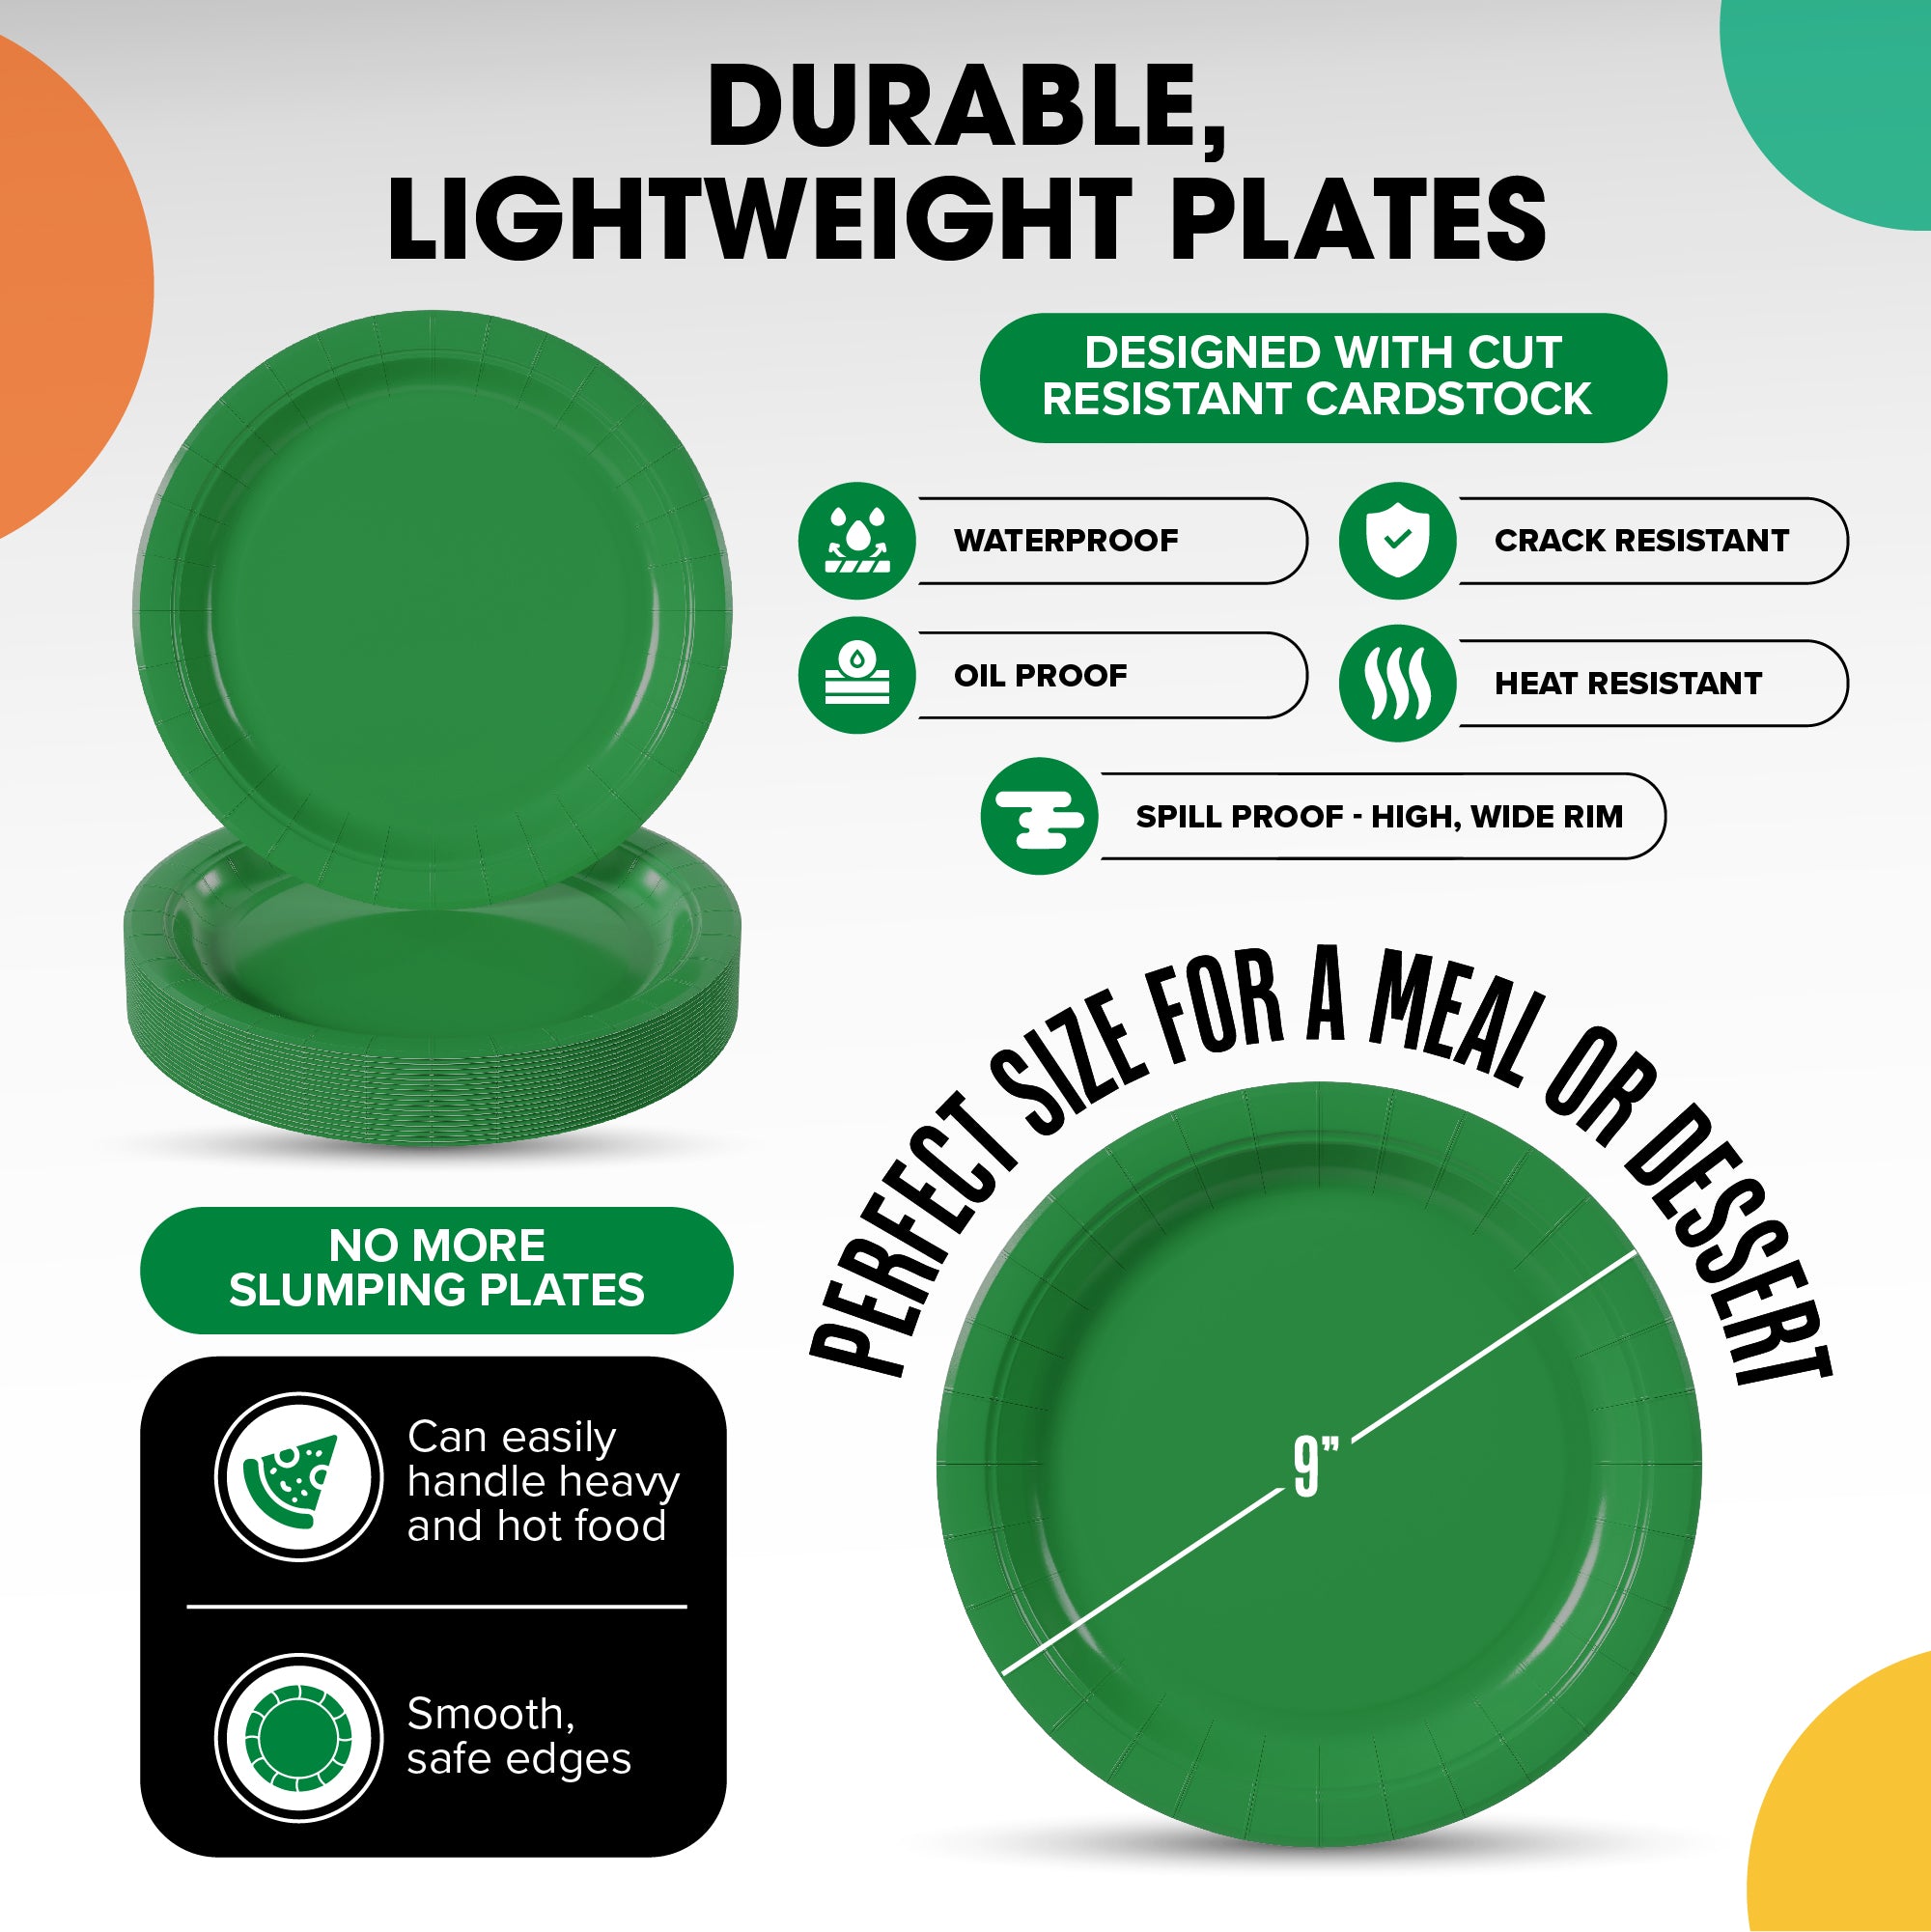 9 In. Emerald Green Paper Plates - 500 Ct.